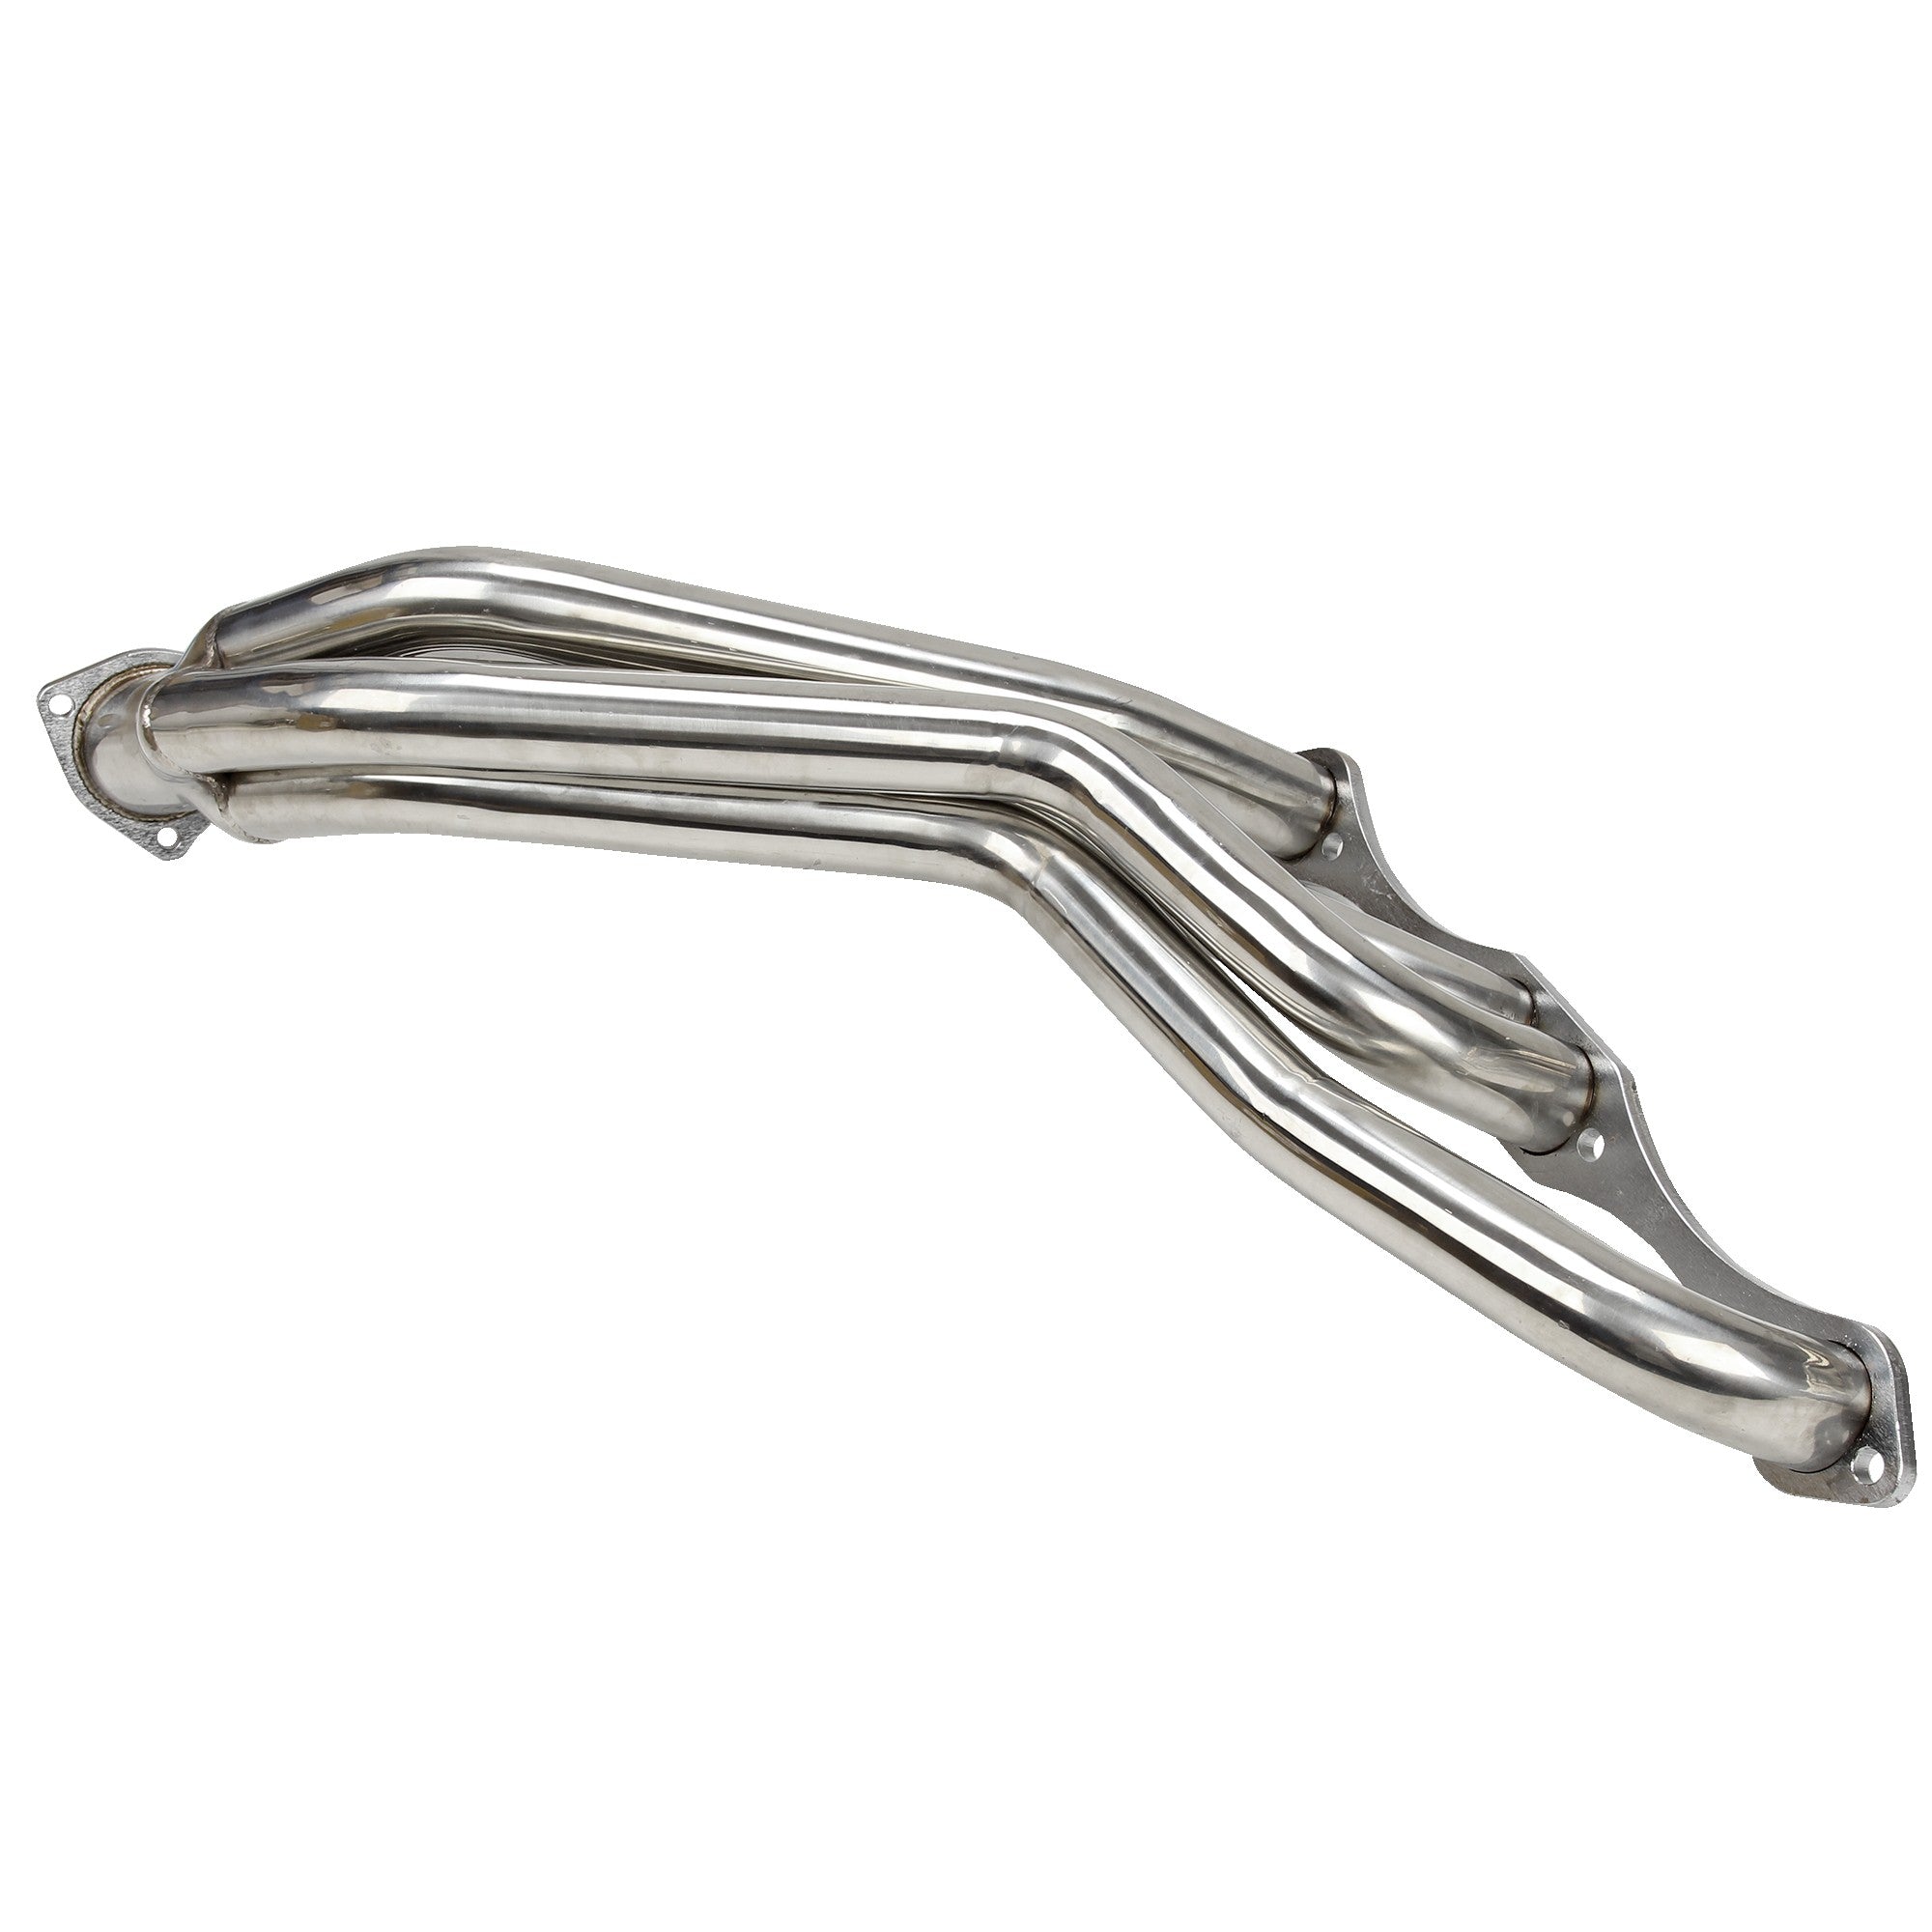 Exhaust Header for 1935-1948 Small Block Chevy Flashark